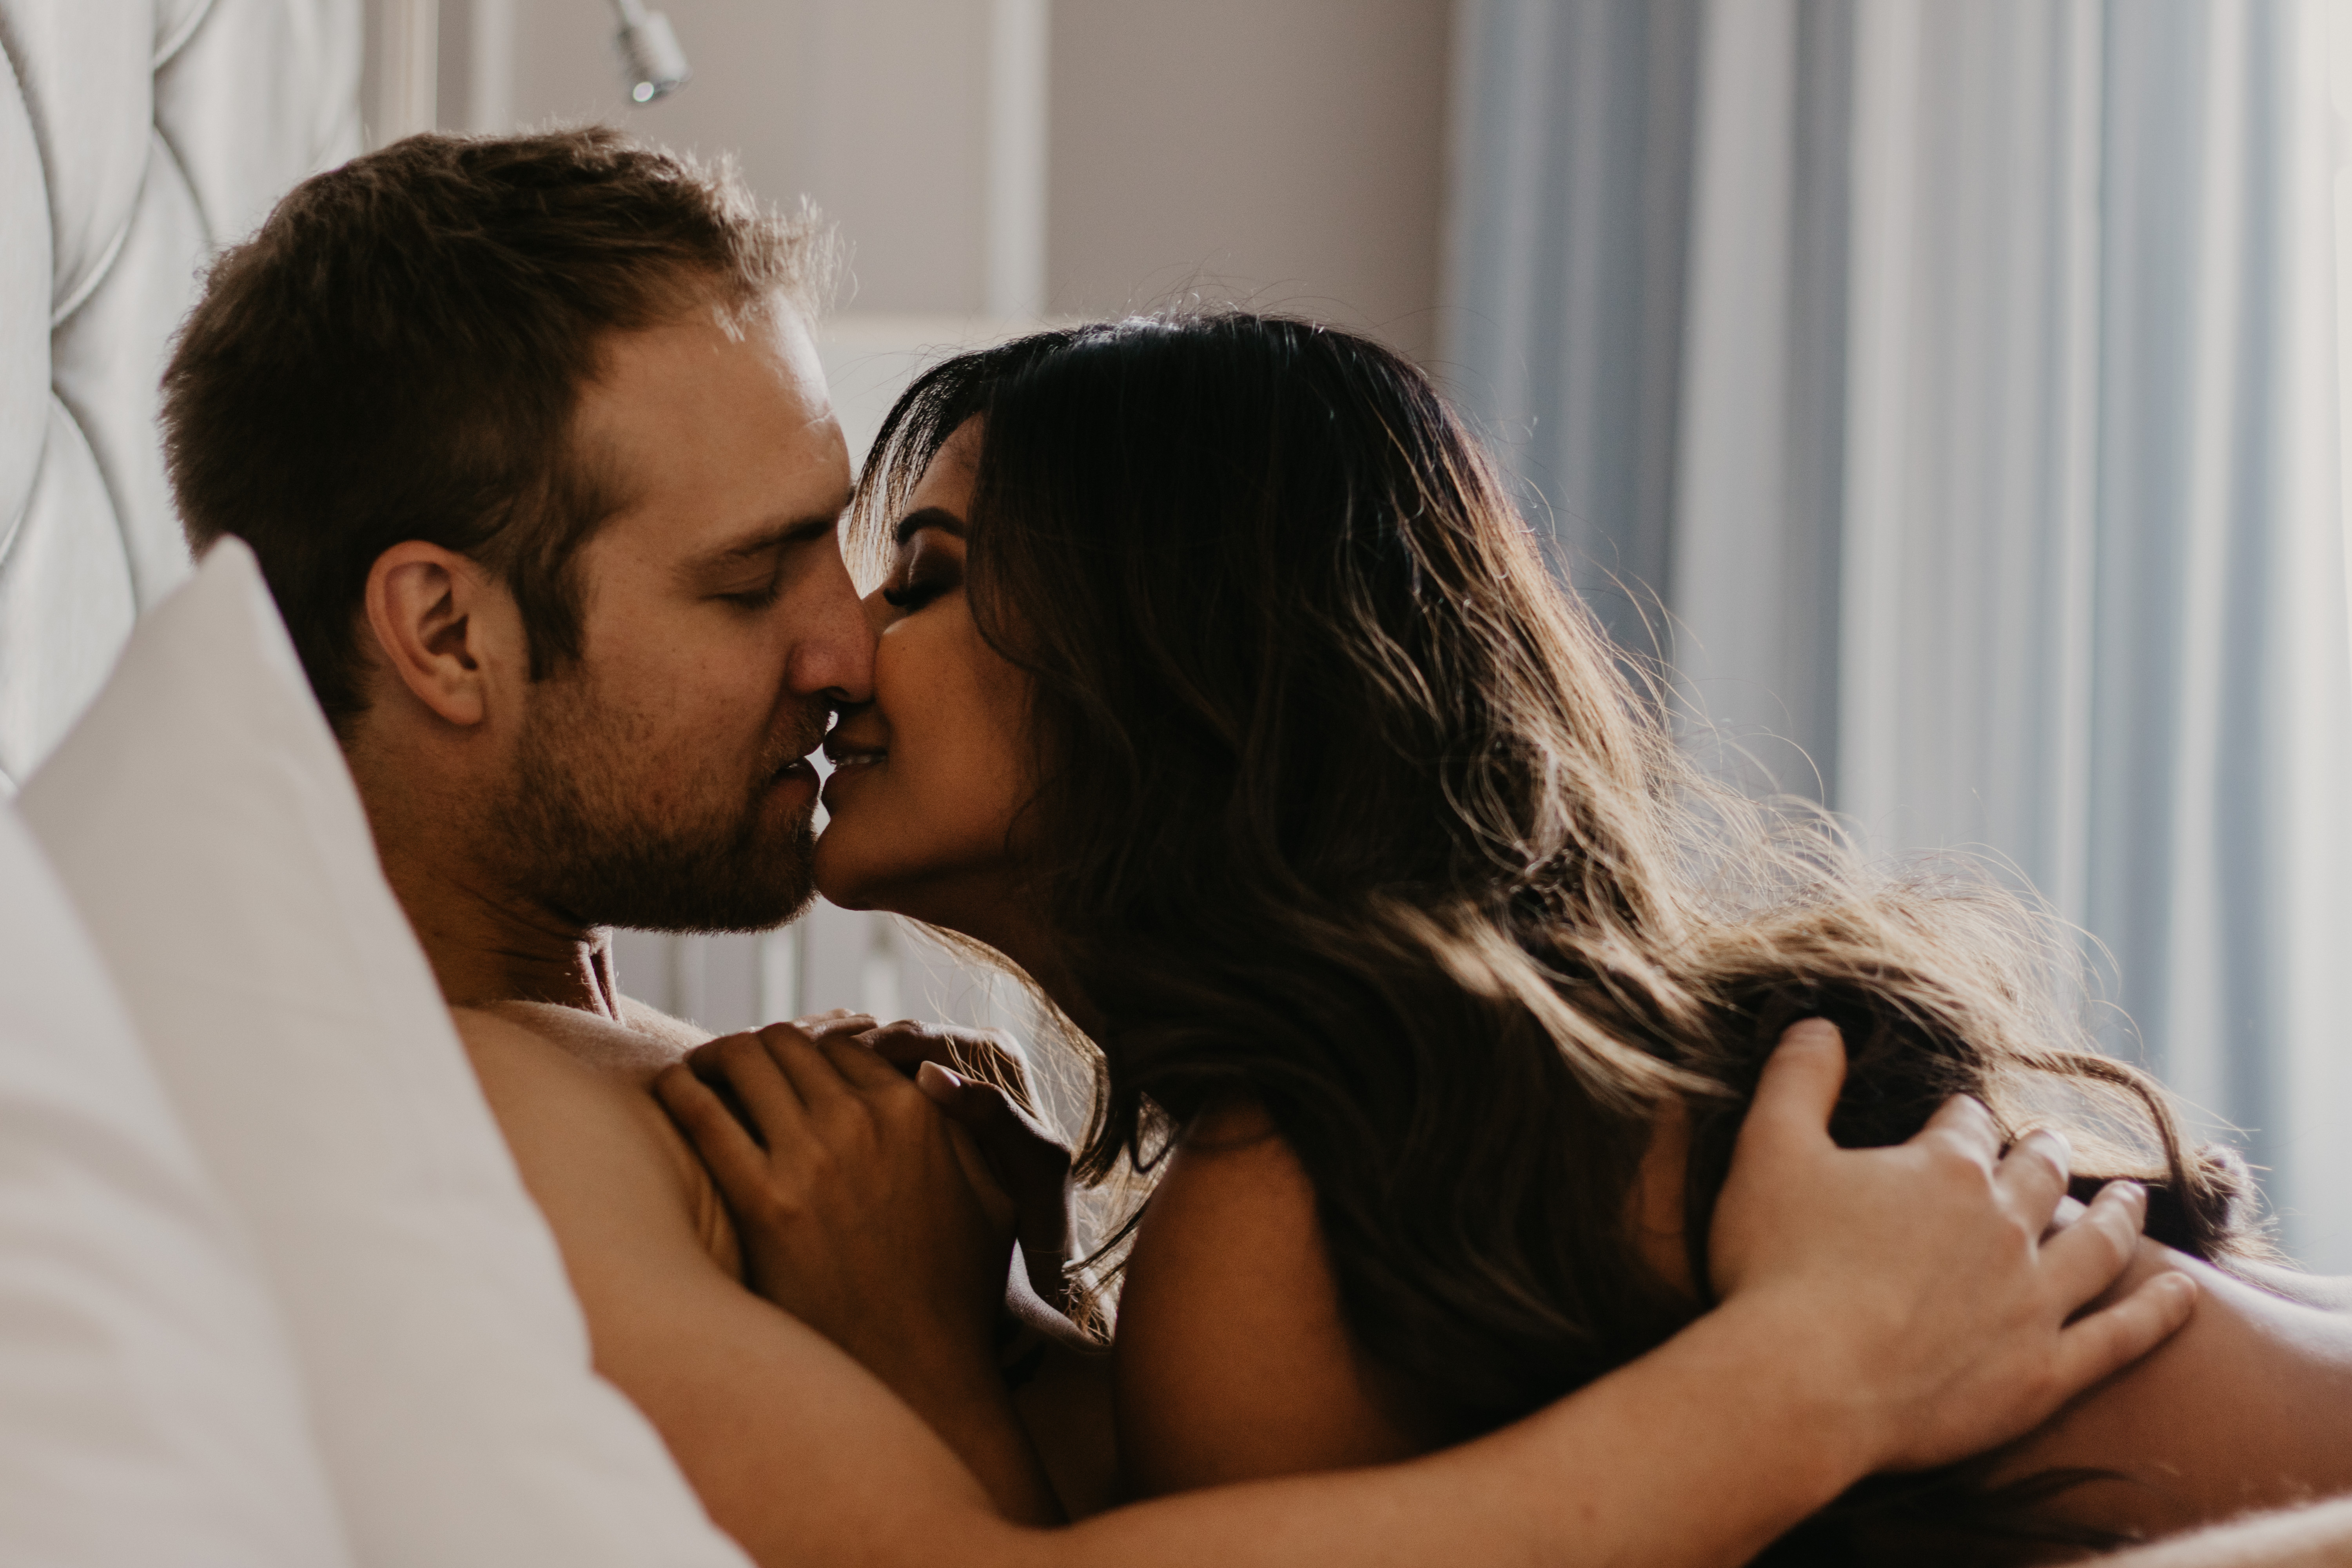 100 Intimate Shots for a Night of Romance